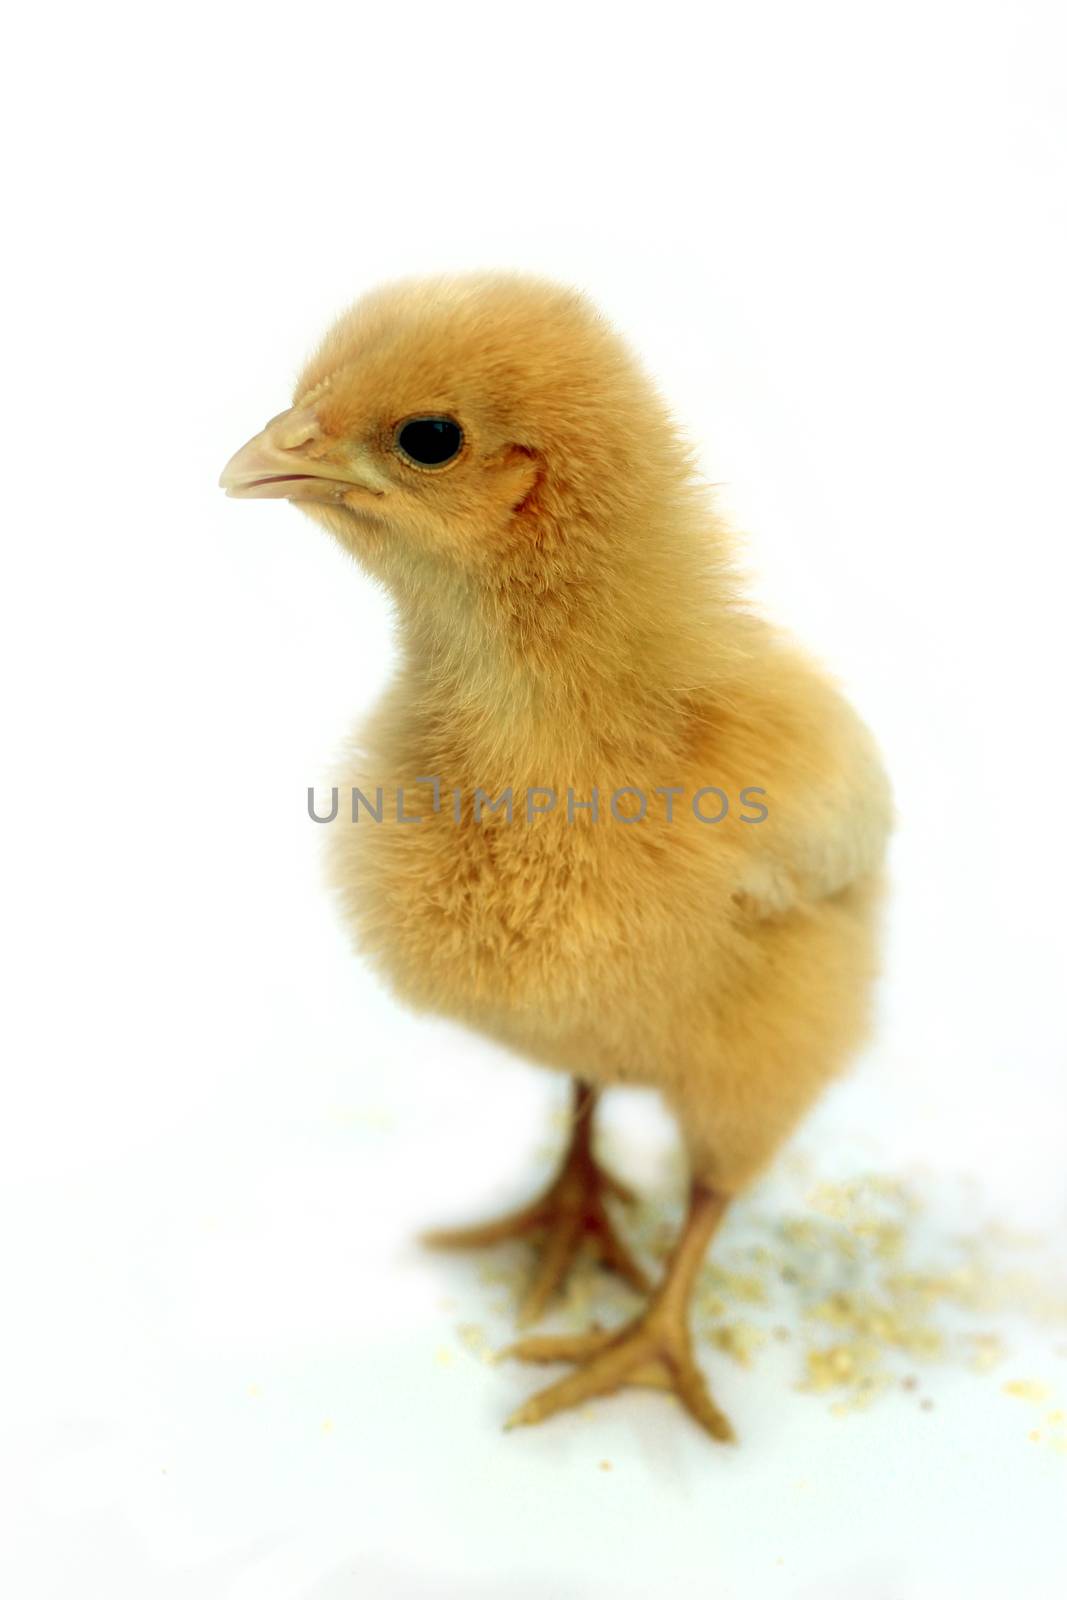 Image of chick isolated on white background.